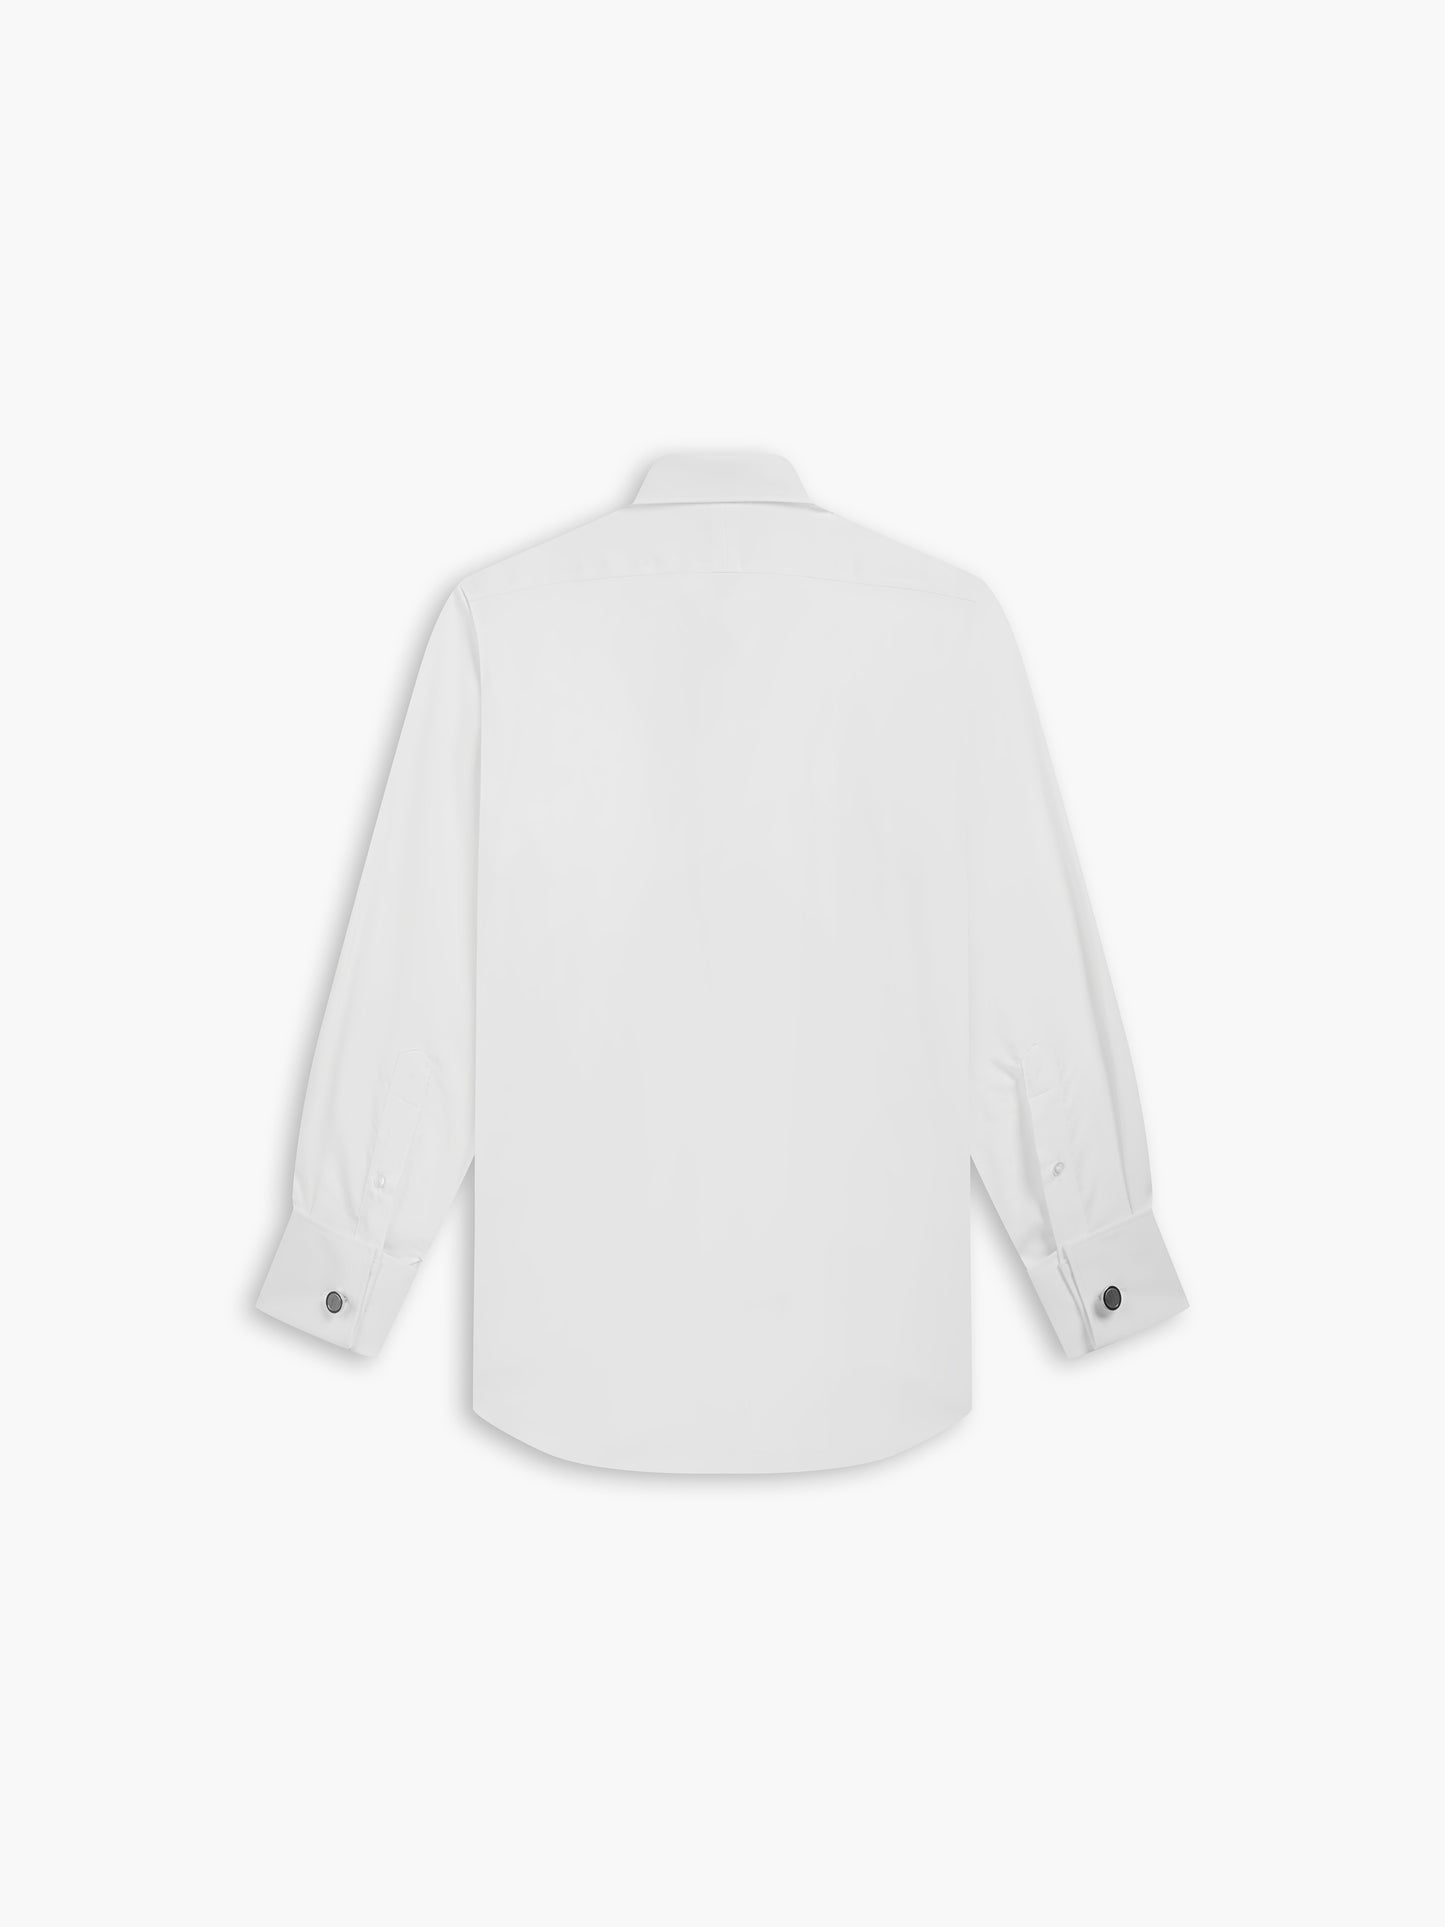 Max Performance White Twill Fitted Double Cuff Classic Collar Shirt